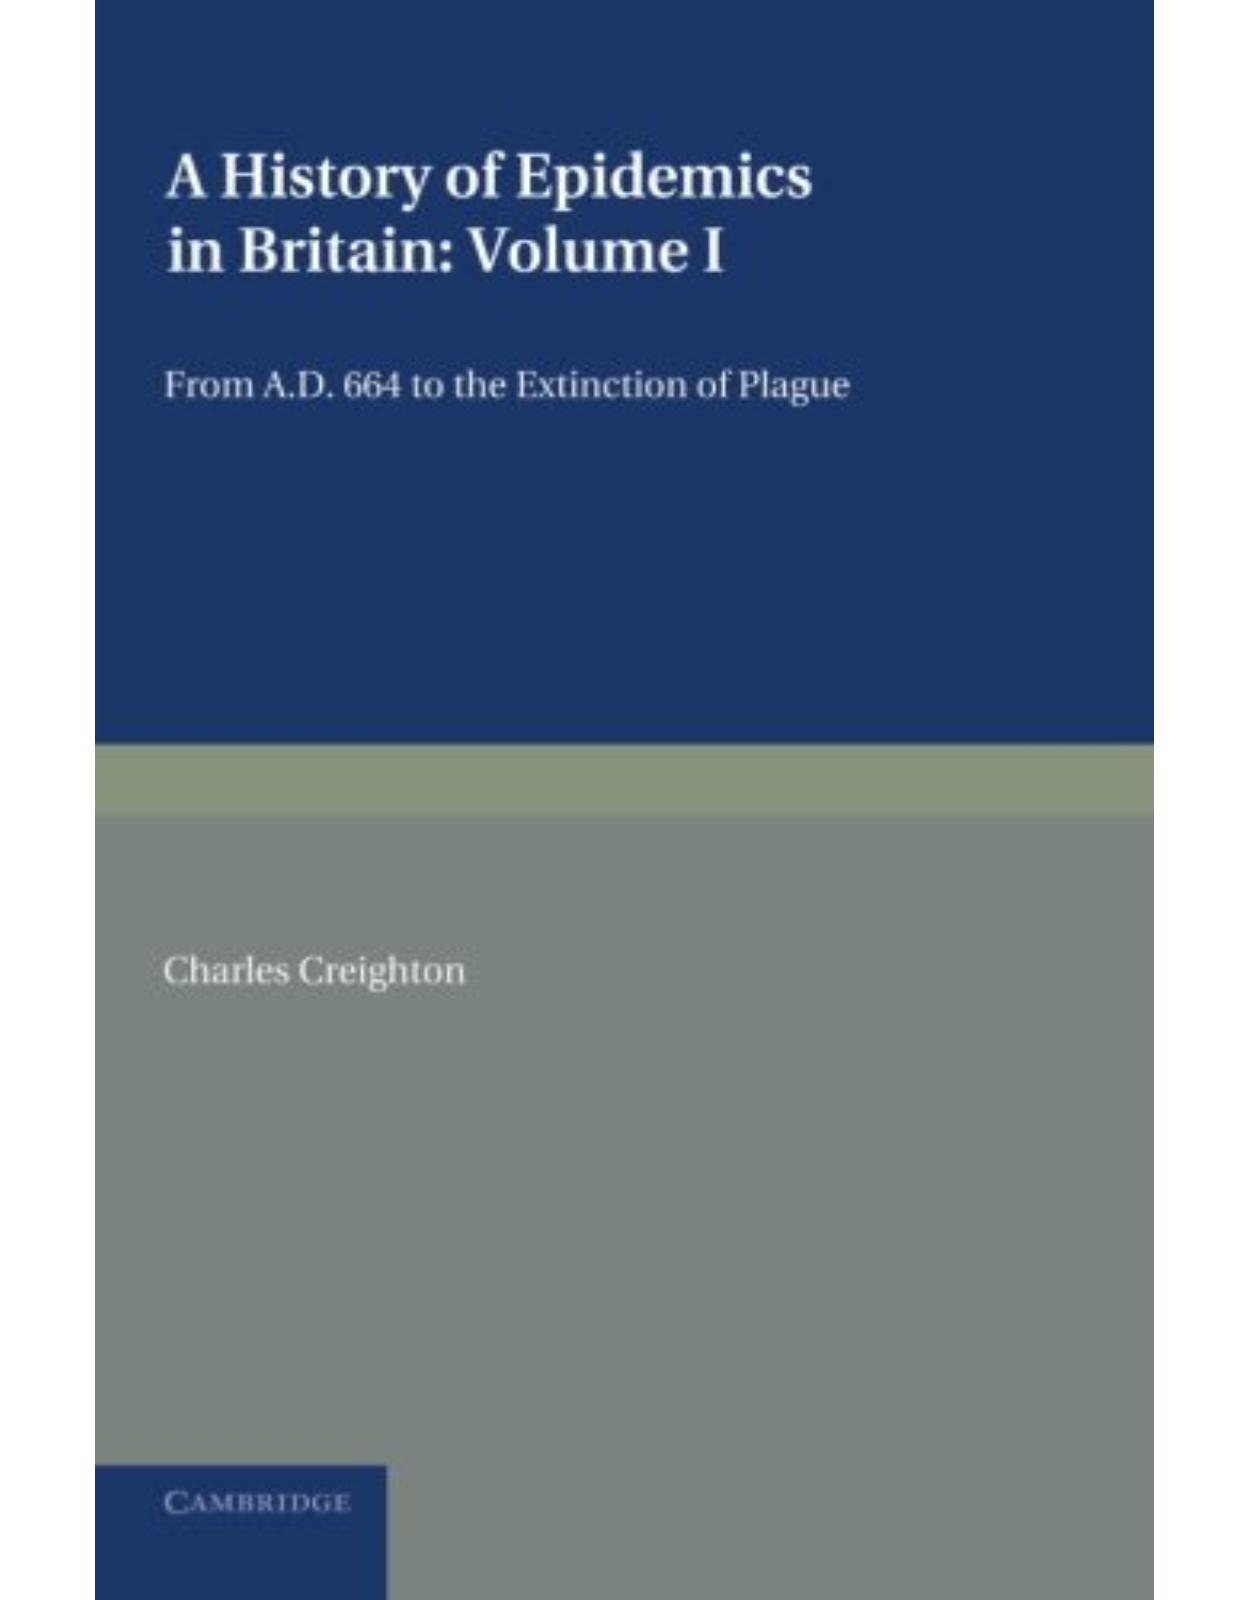 A History of Epidemics in Britain: Volume 1, From AD 664 to the Extinction of Plague